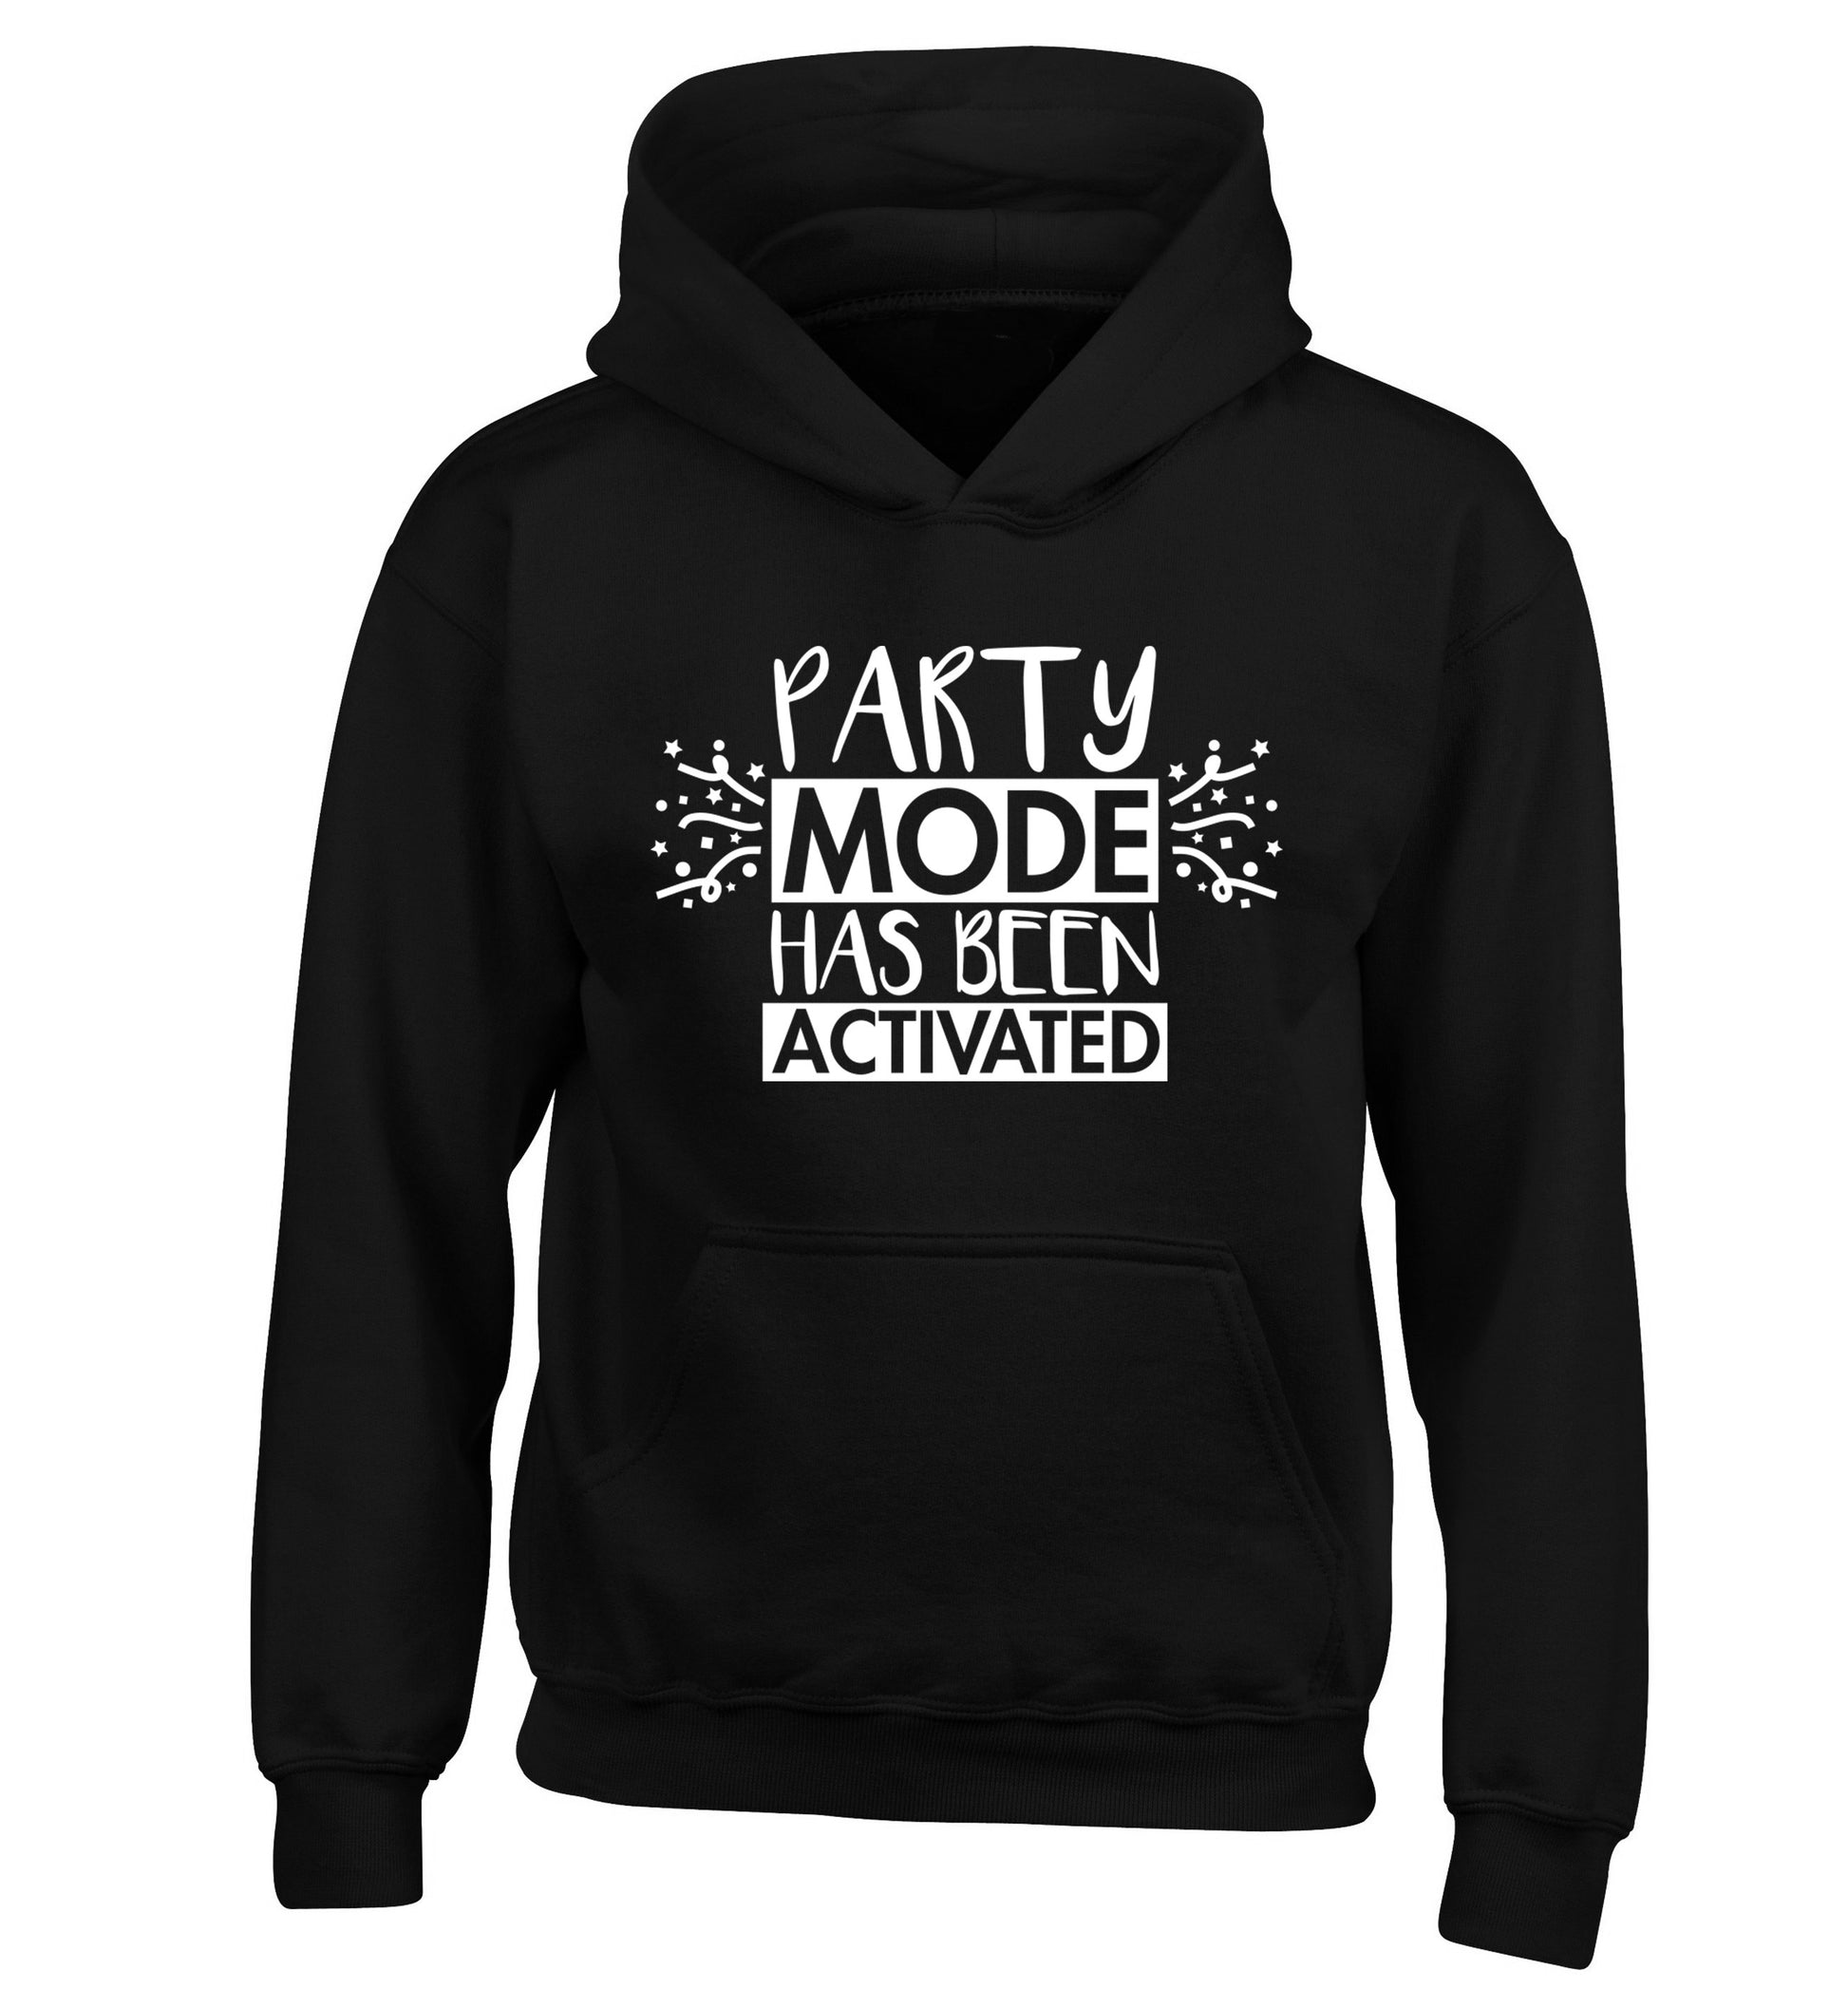 Please do not disturb party mode has been activated children's black hoodie 12-14 Years